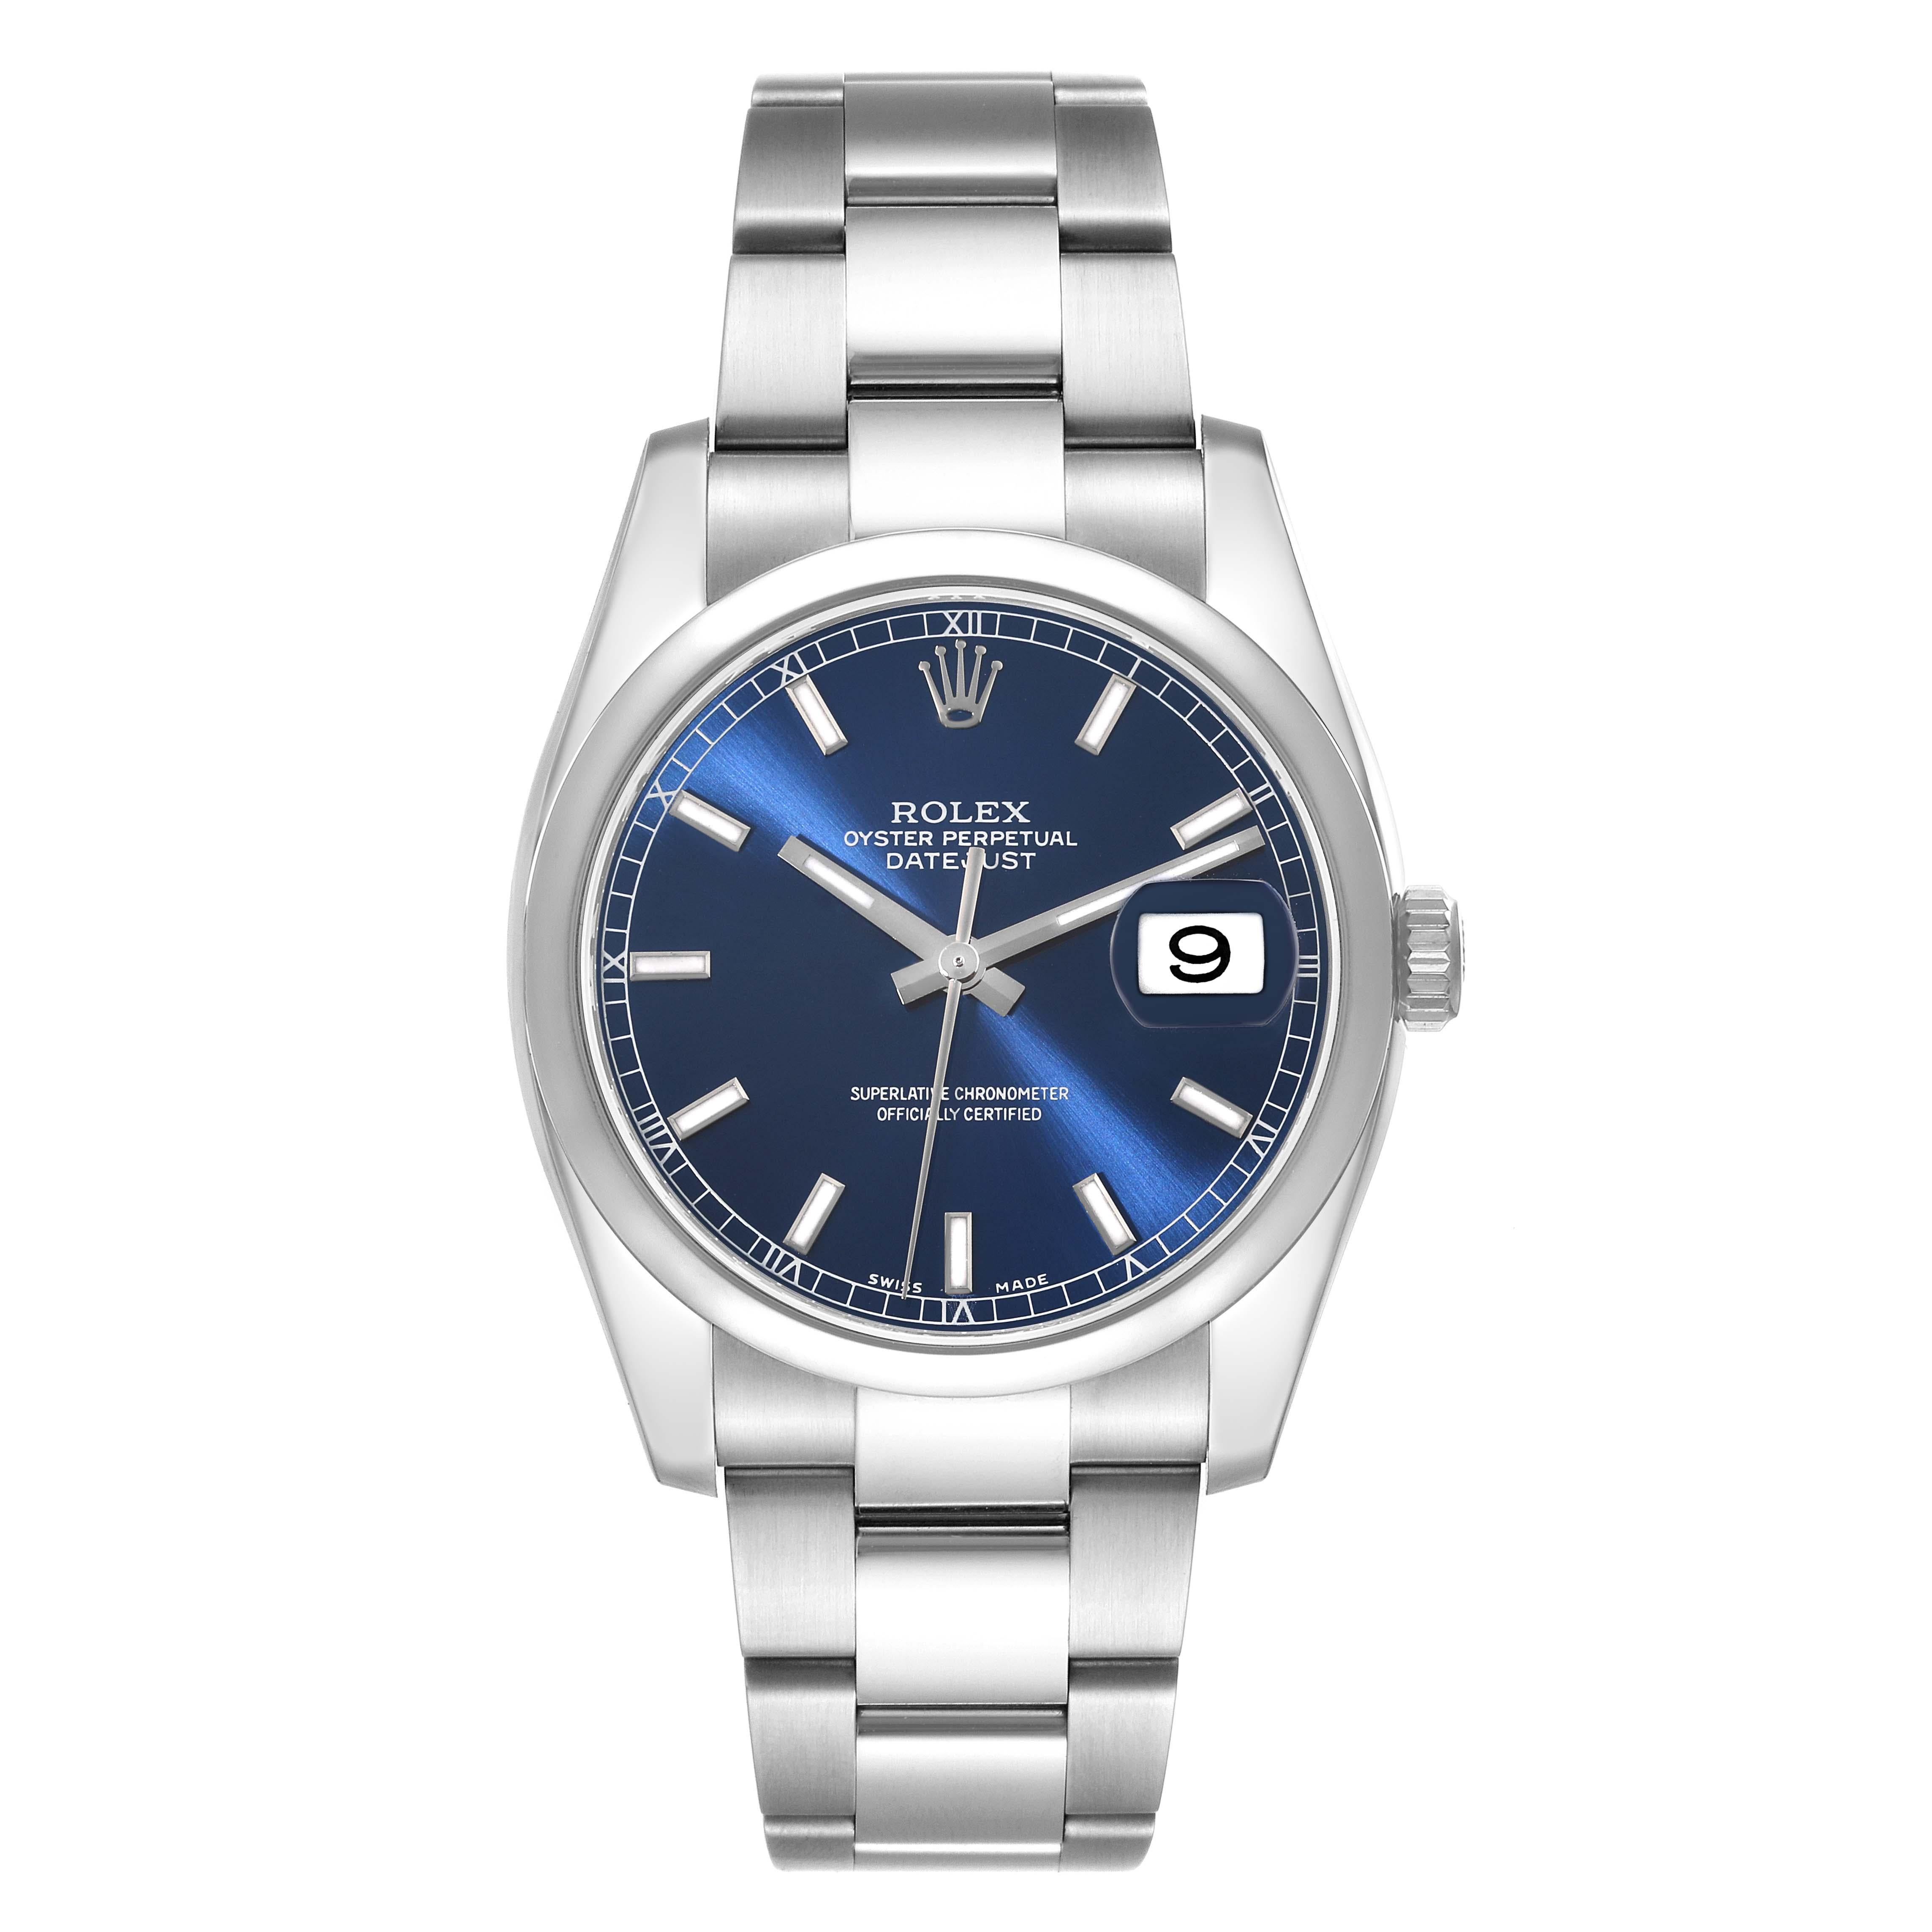 Rolex Datejust Blue Dial Oyster Bracelet Steel Mens Watch 116200 Box Card. Officially certified chronometer self-winding movement. Stainless steel case 36.0 mm in diameter. Rolex logo on a crown. Stainless steel smooth domed bezel. Scratch resistant